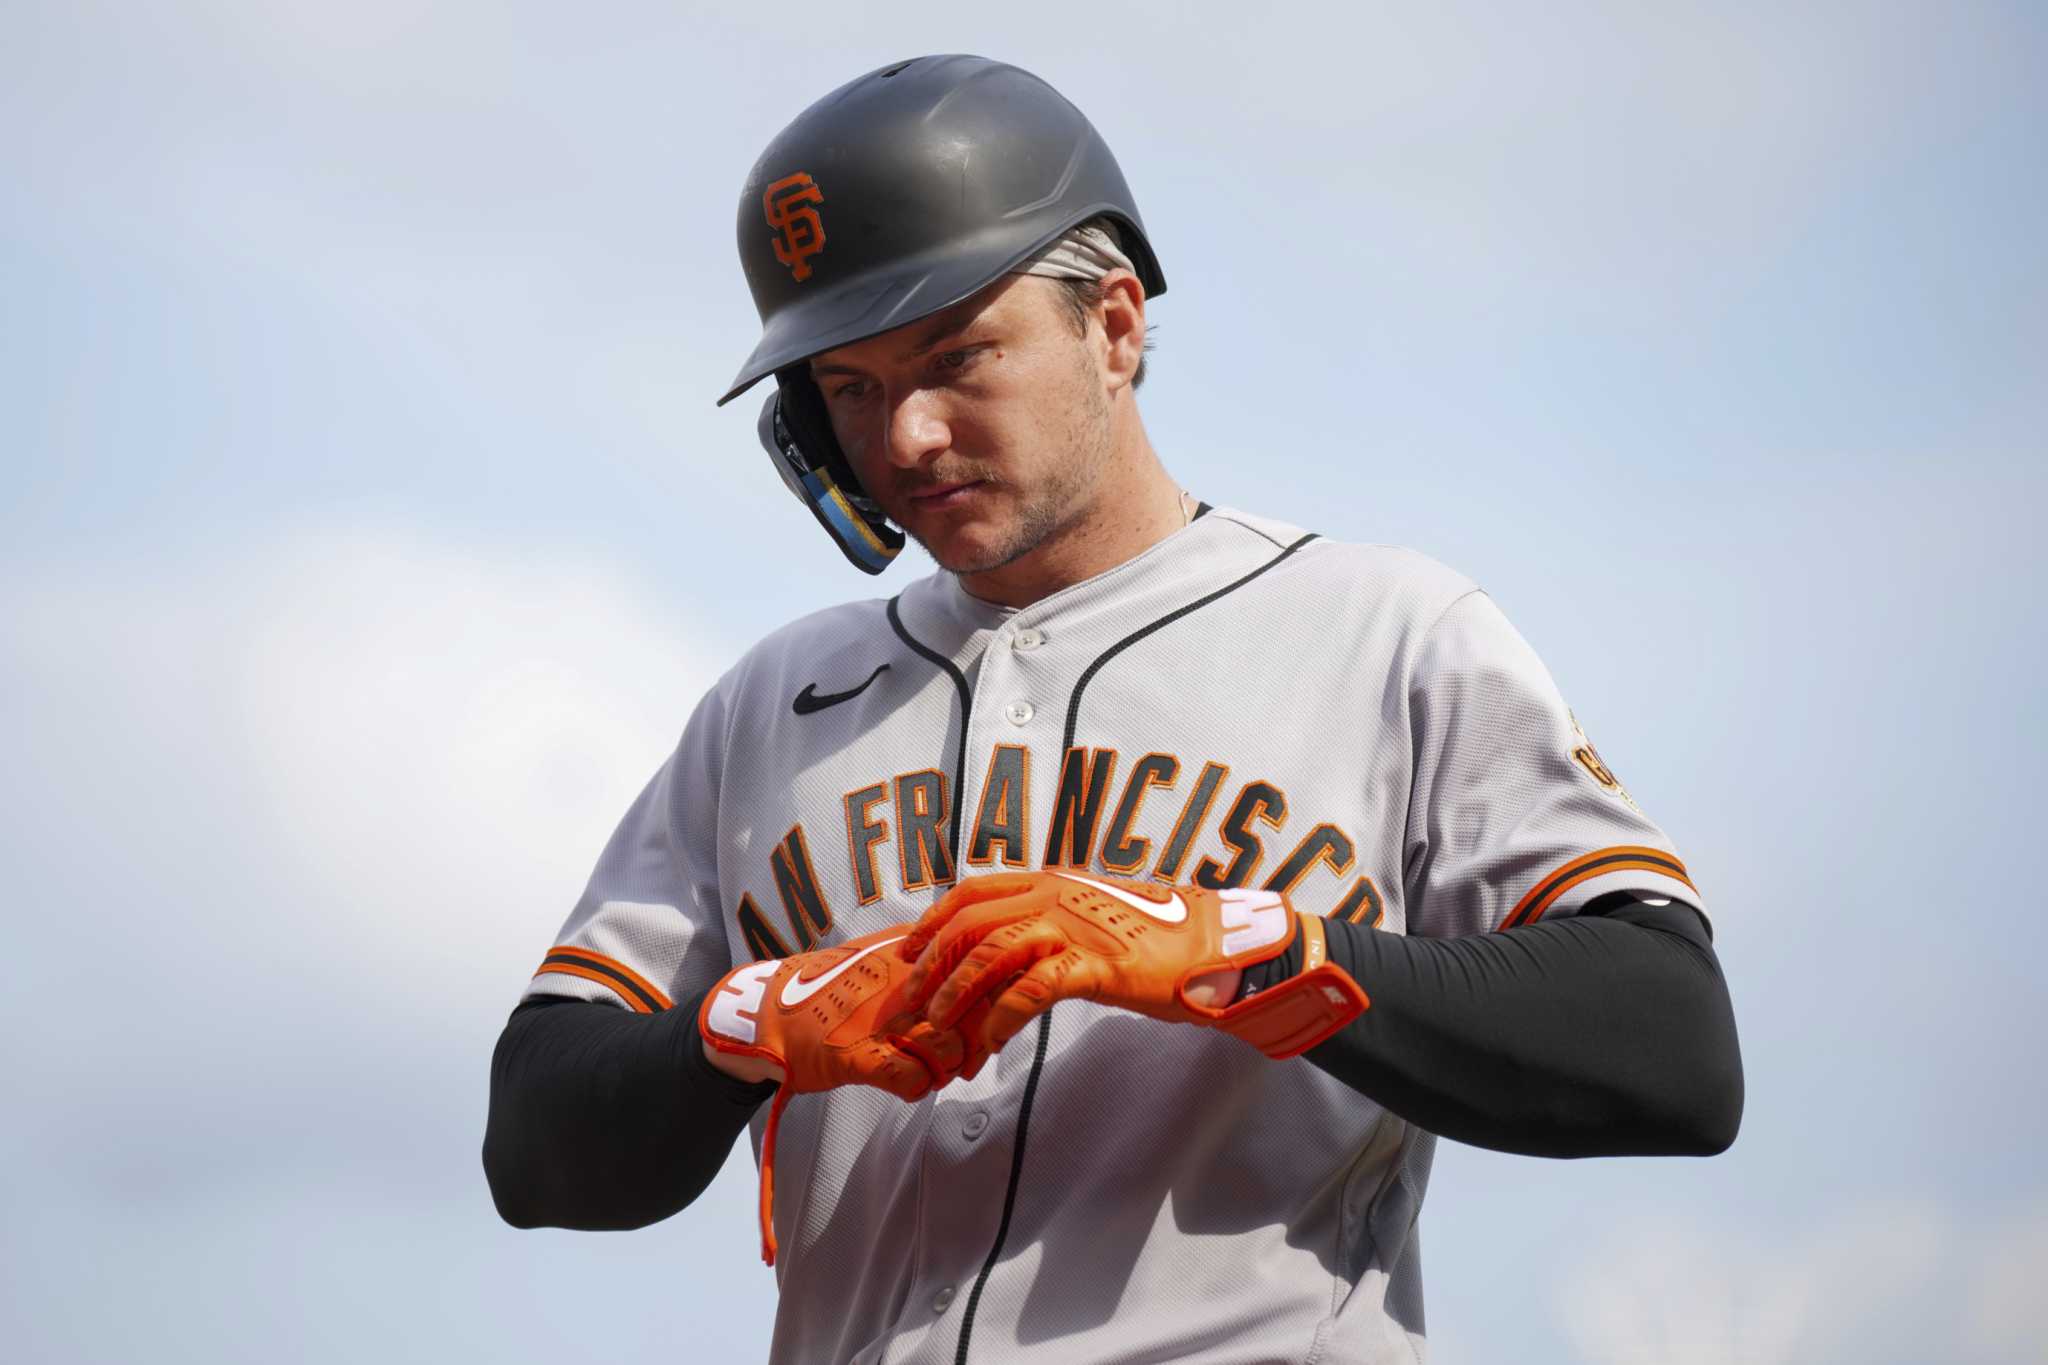 MLB trade deadline: SF Giants stand pat as other contenders make moves